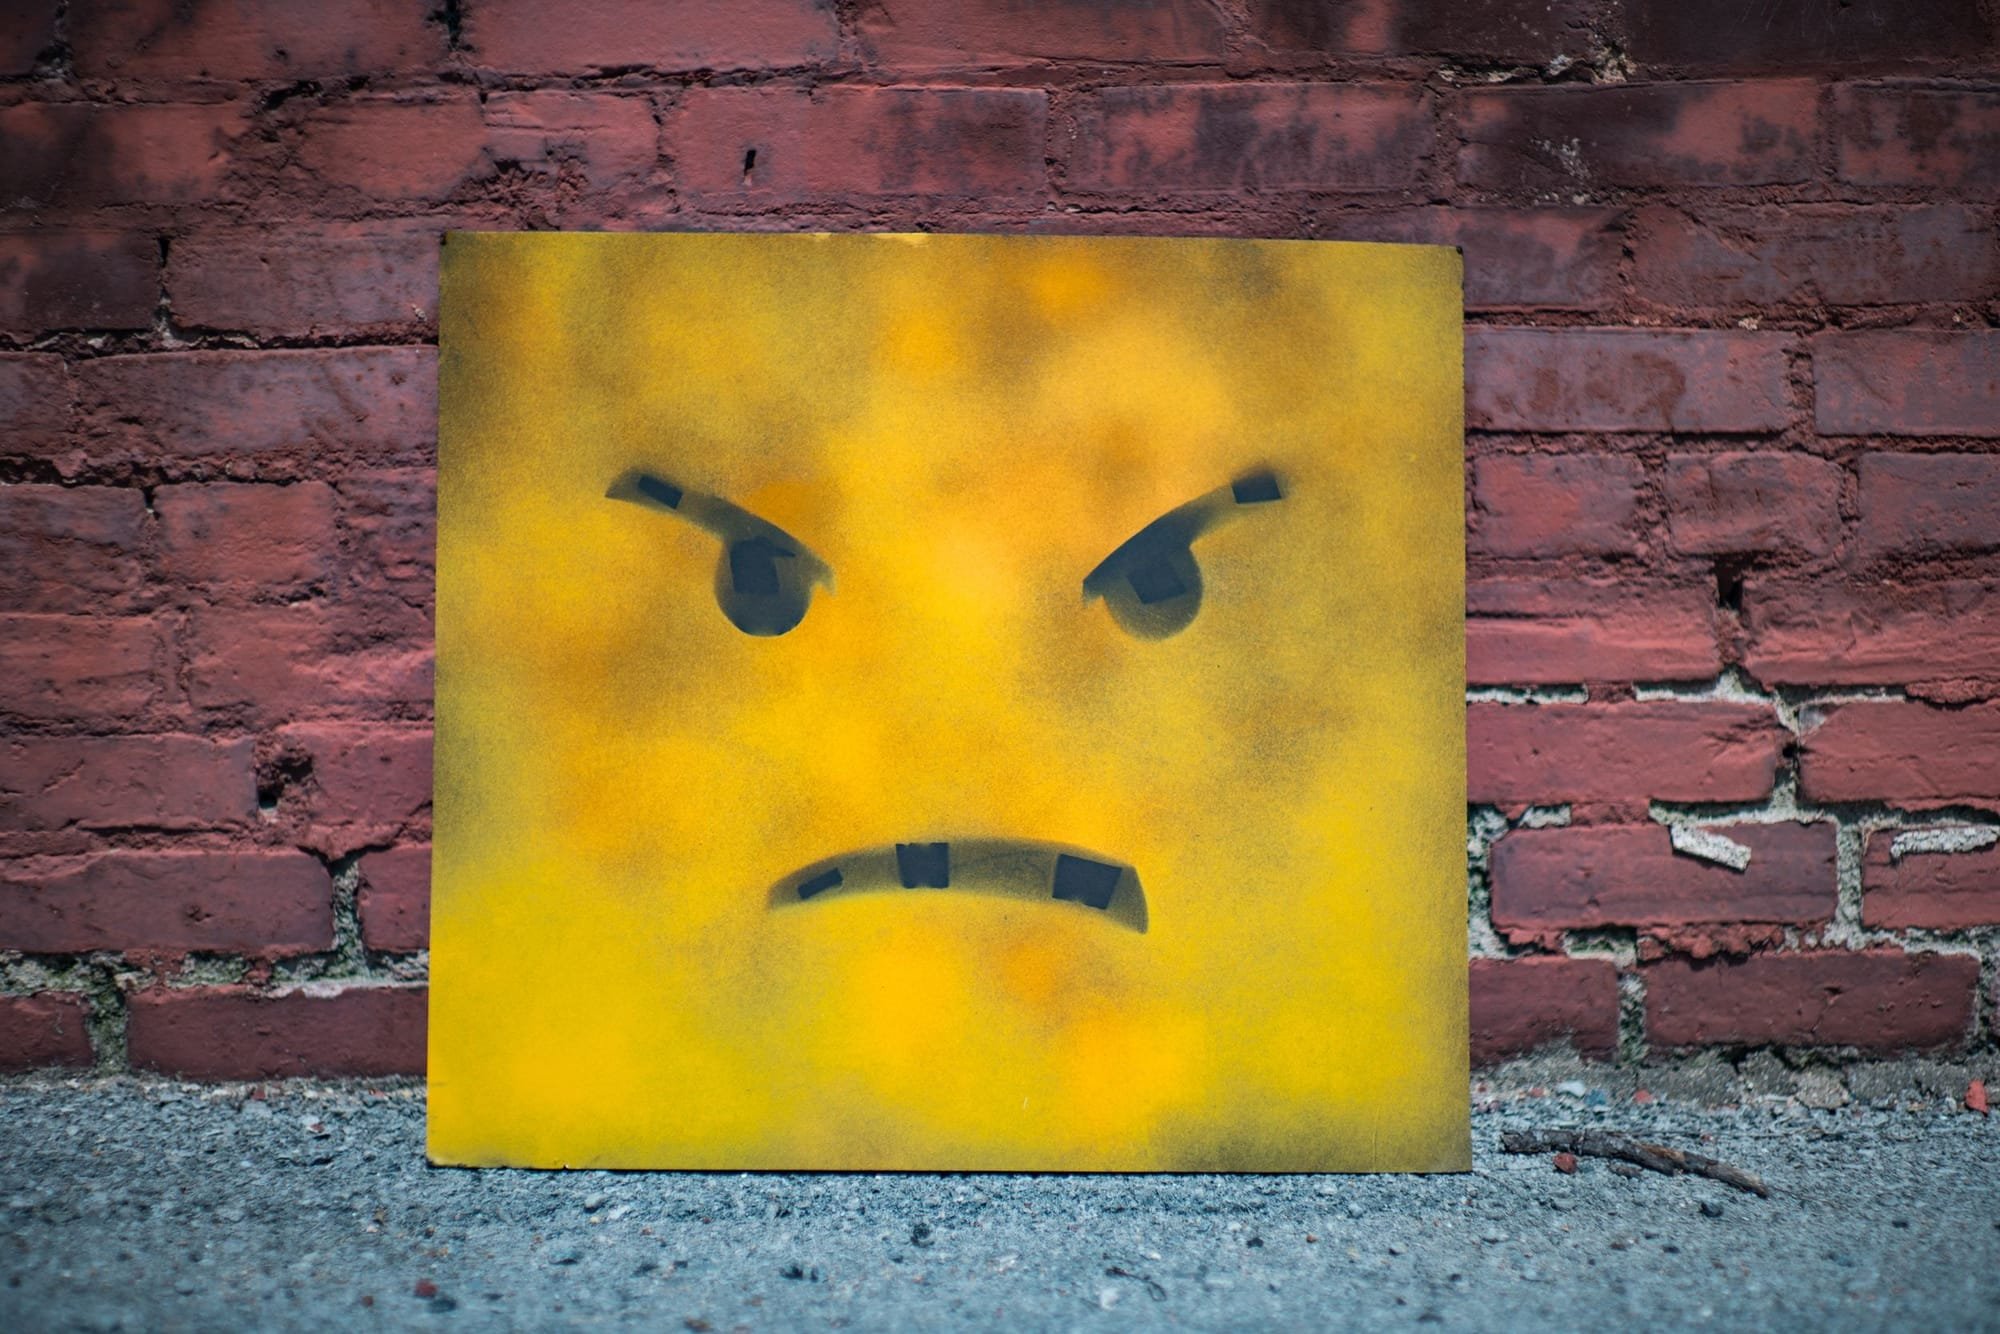 When does anger become a problem?